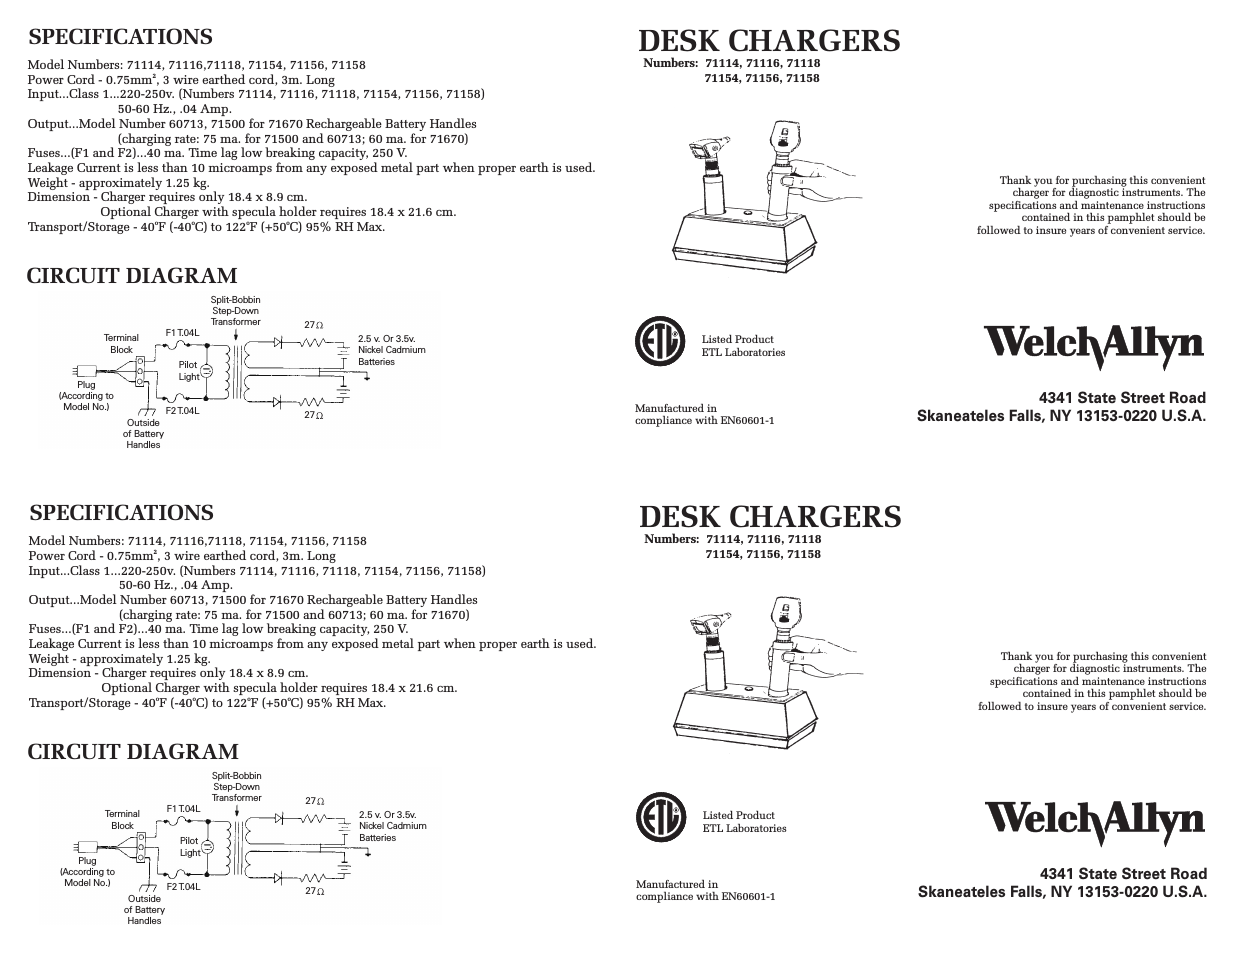 Desk Set - Quick Reference Guide